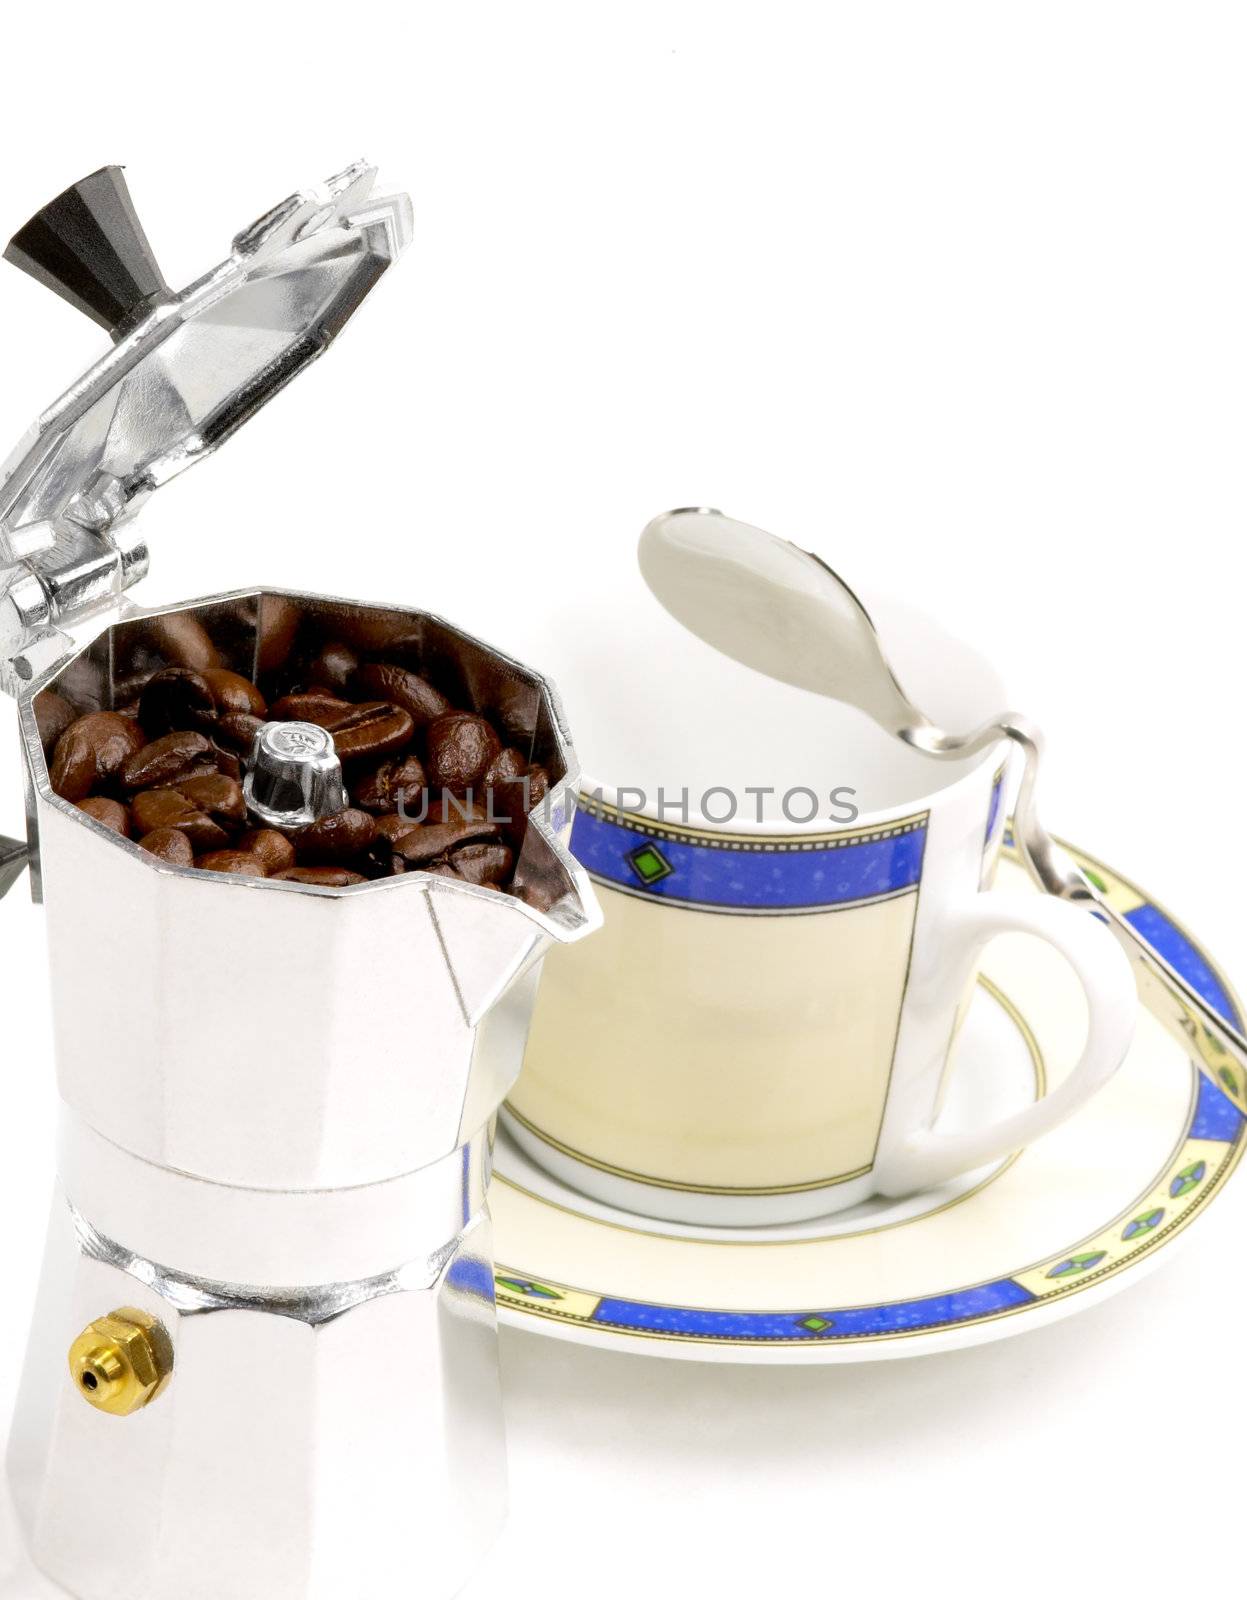 mocha coffee machine and cup on white background